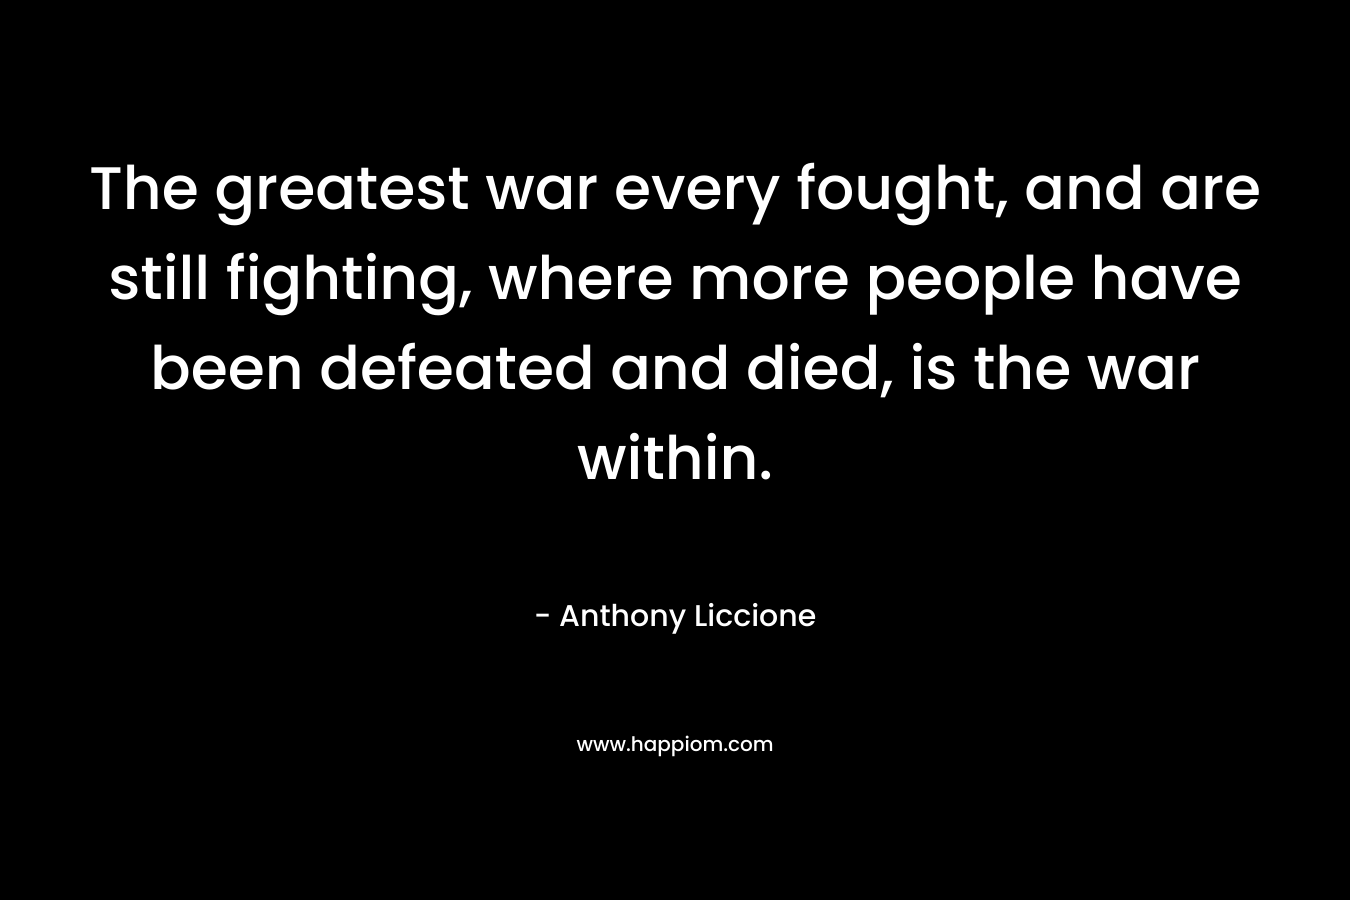 The greatest war every fought, and are still fighting, where more people have been defeated and died, is the war within. – Anthony Liccione